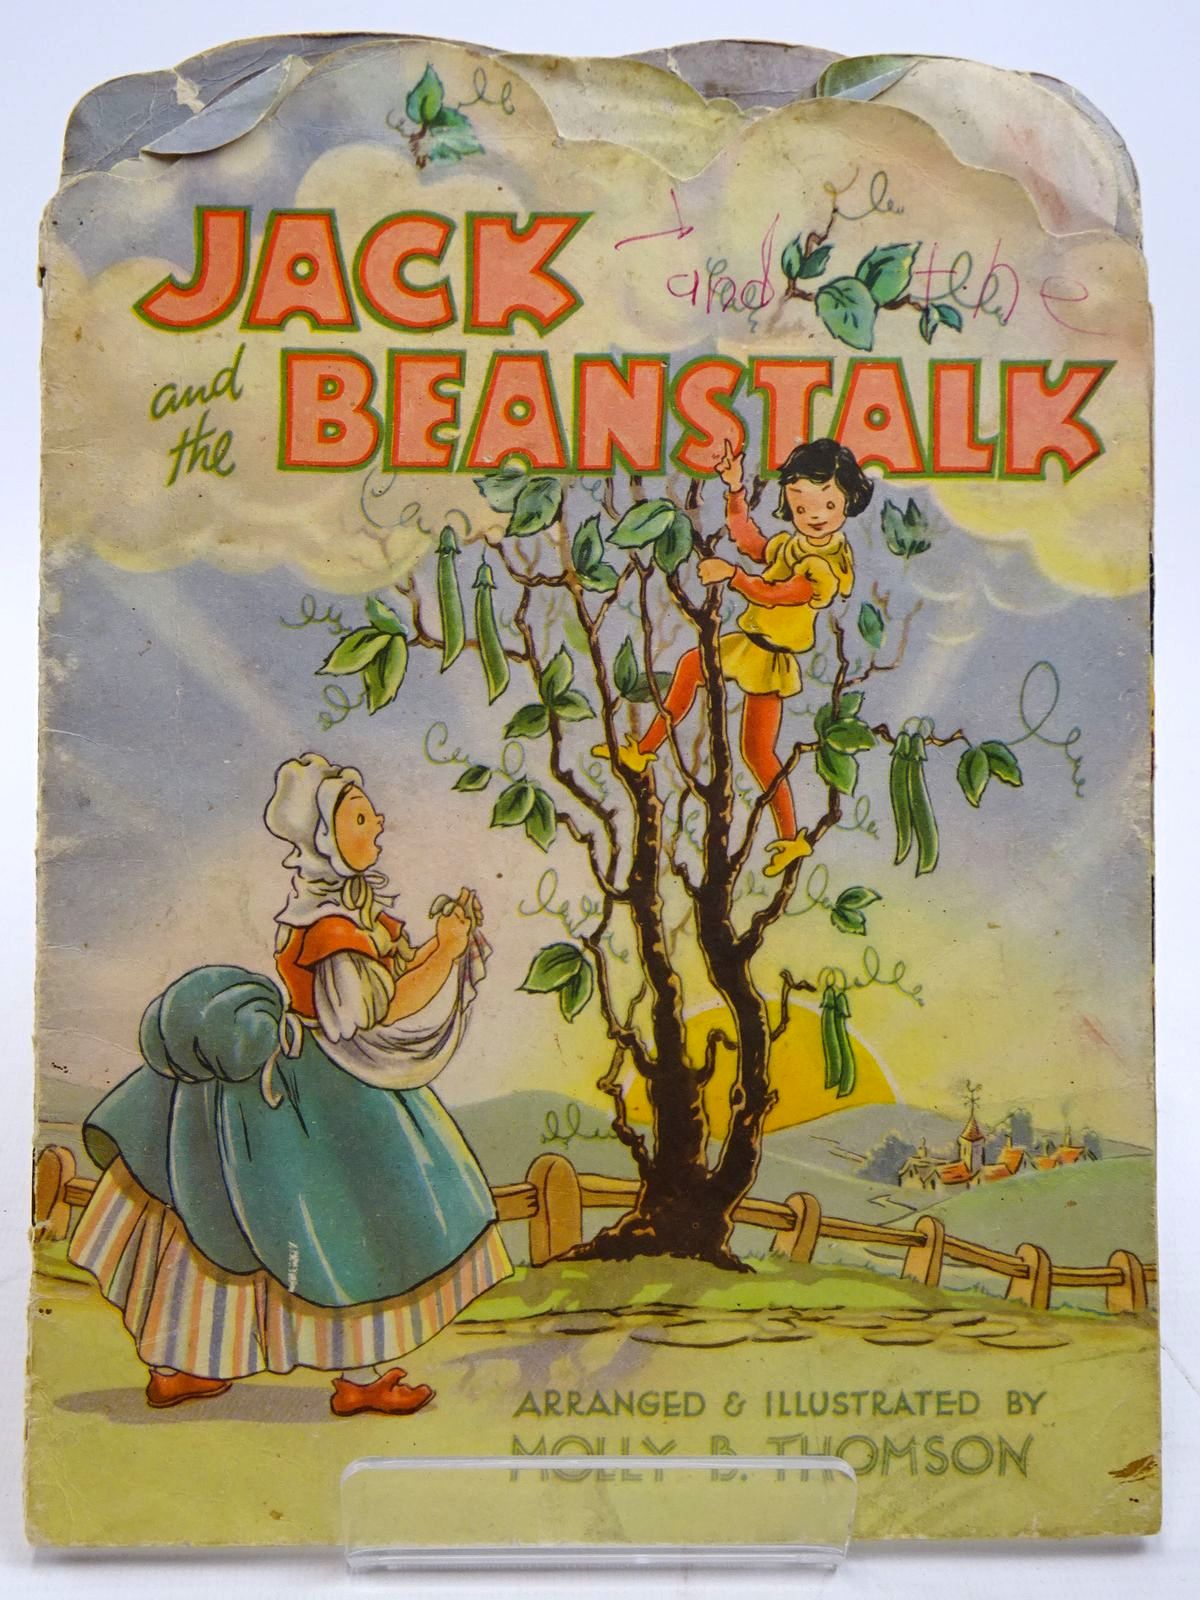 THOMSON, MOLLY B. ILLUSTRATED BY THOMSON, MOLLY B. - Jack and the Beanstalk